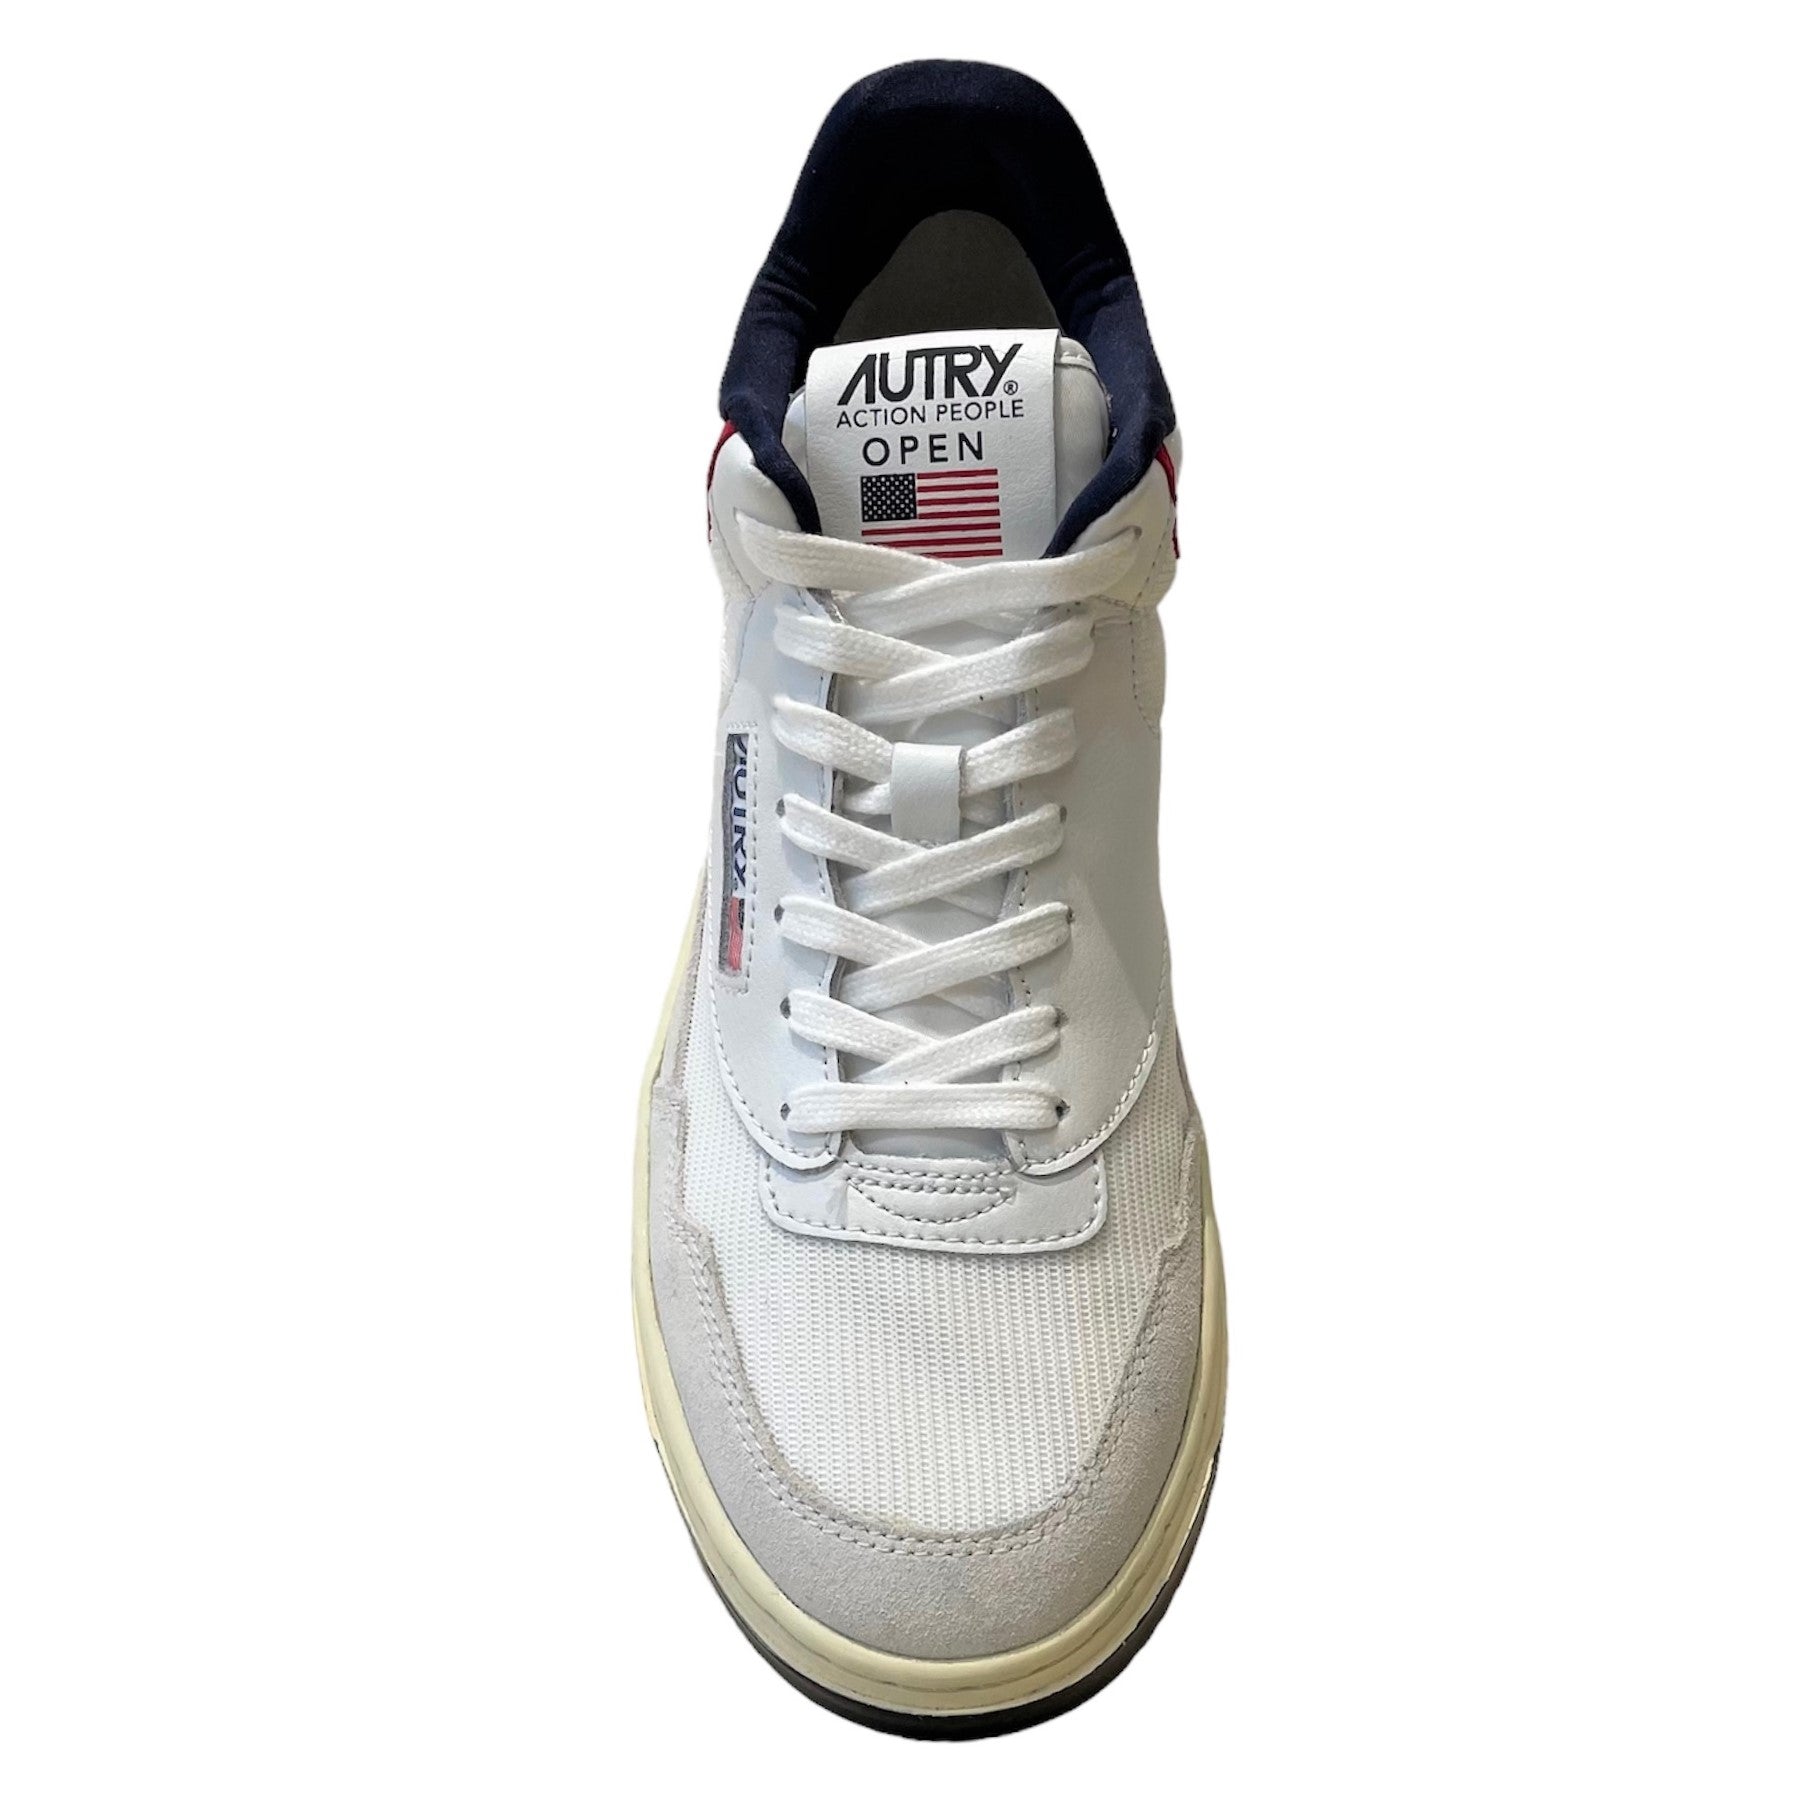 AUTRY Mid Man Open CE05 wht/red